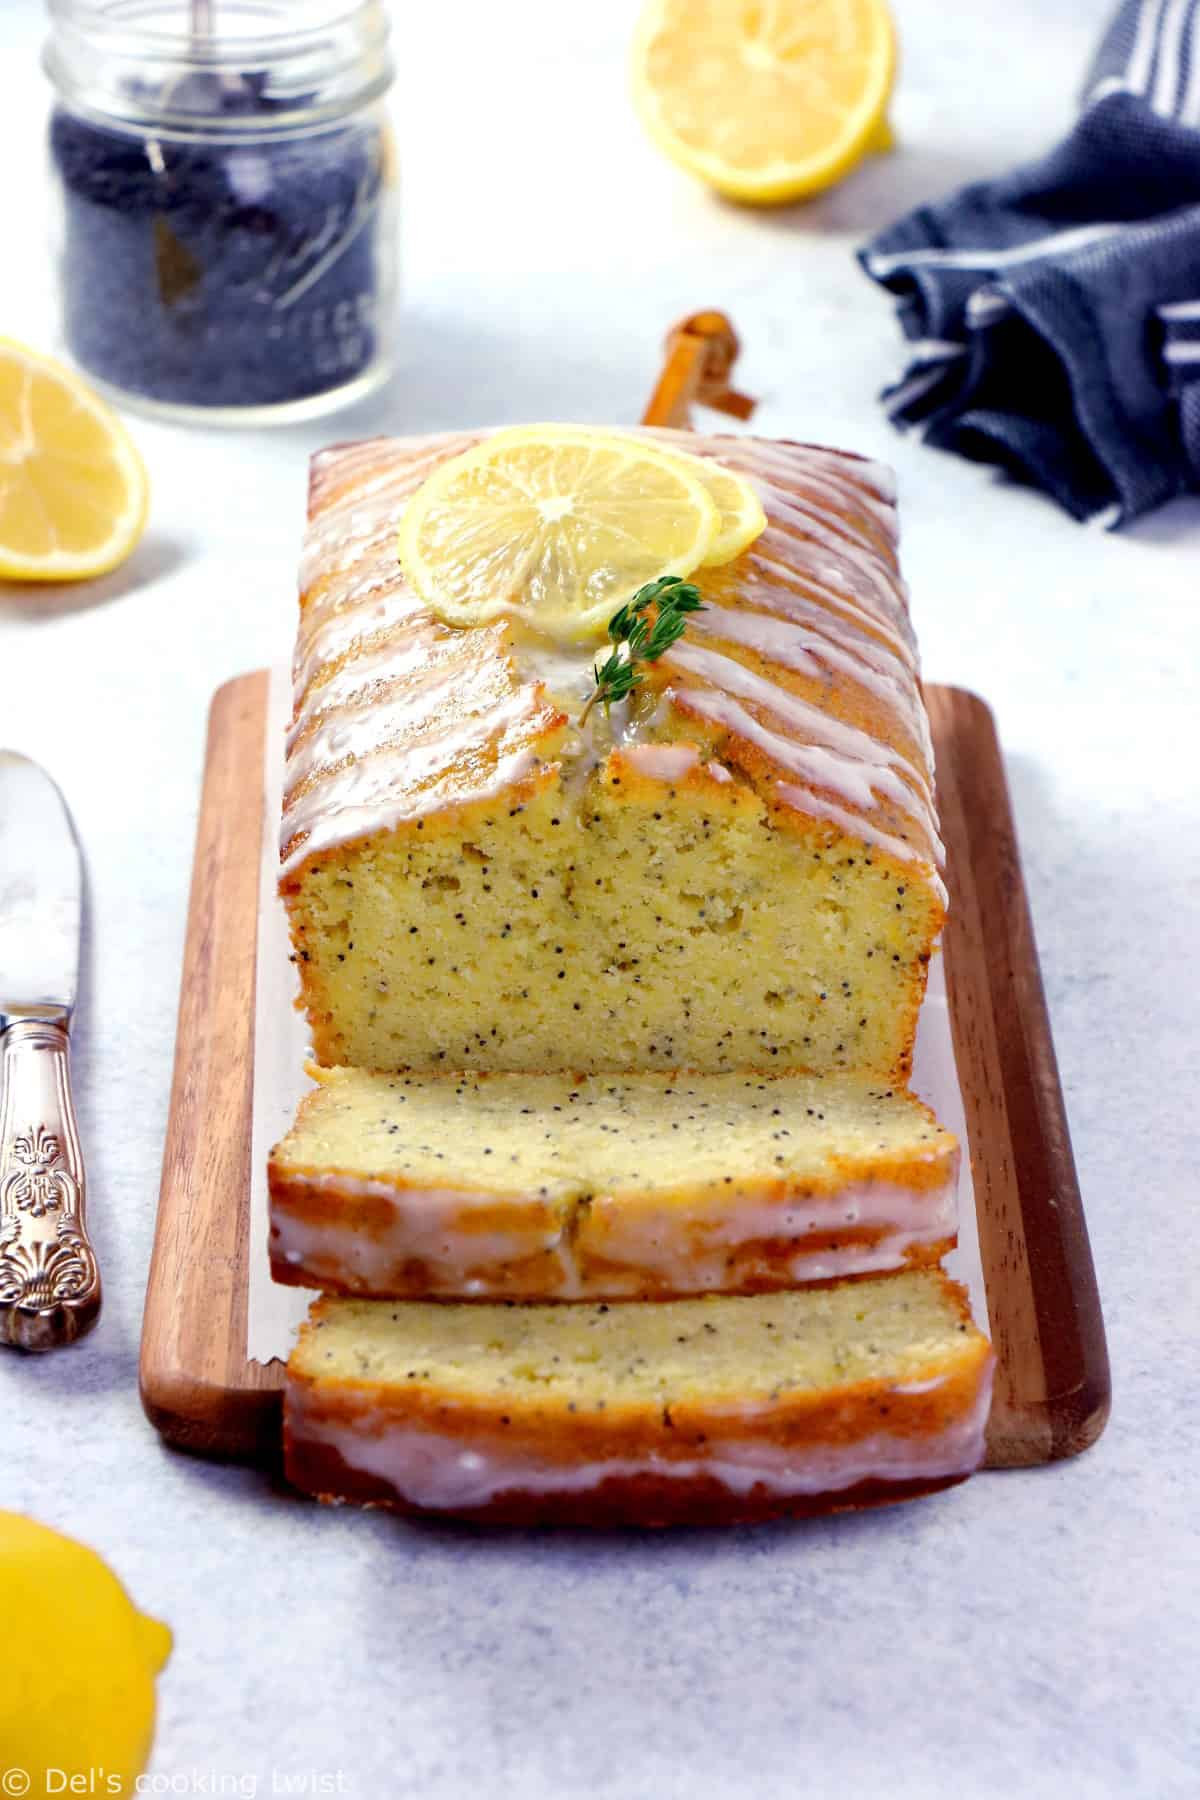 Best Ever Lemon Poppy Seed Loaf is perfectly moist and tender, packed with delicious lemony flavors and sprinkled with just the right amount of poppy seeds.